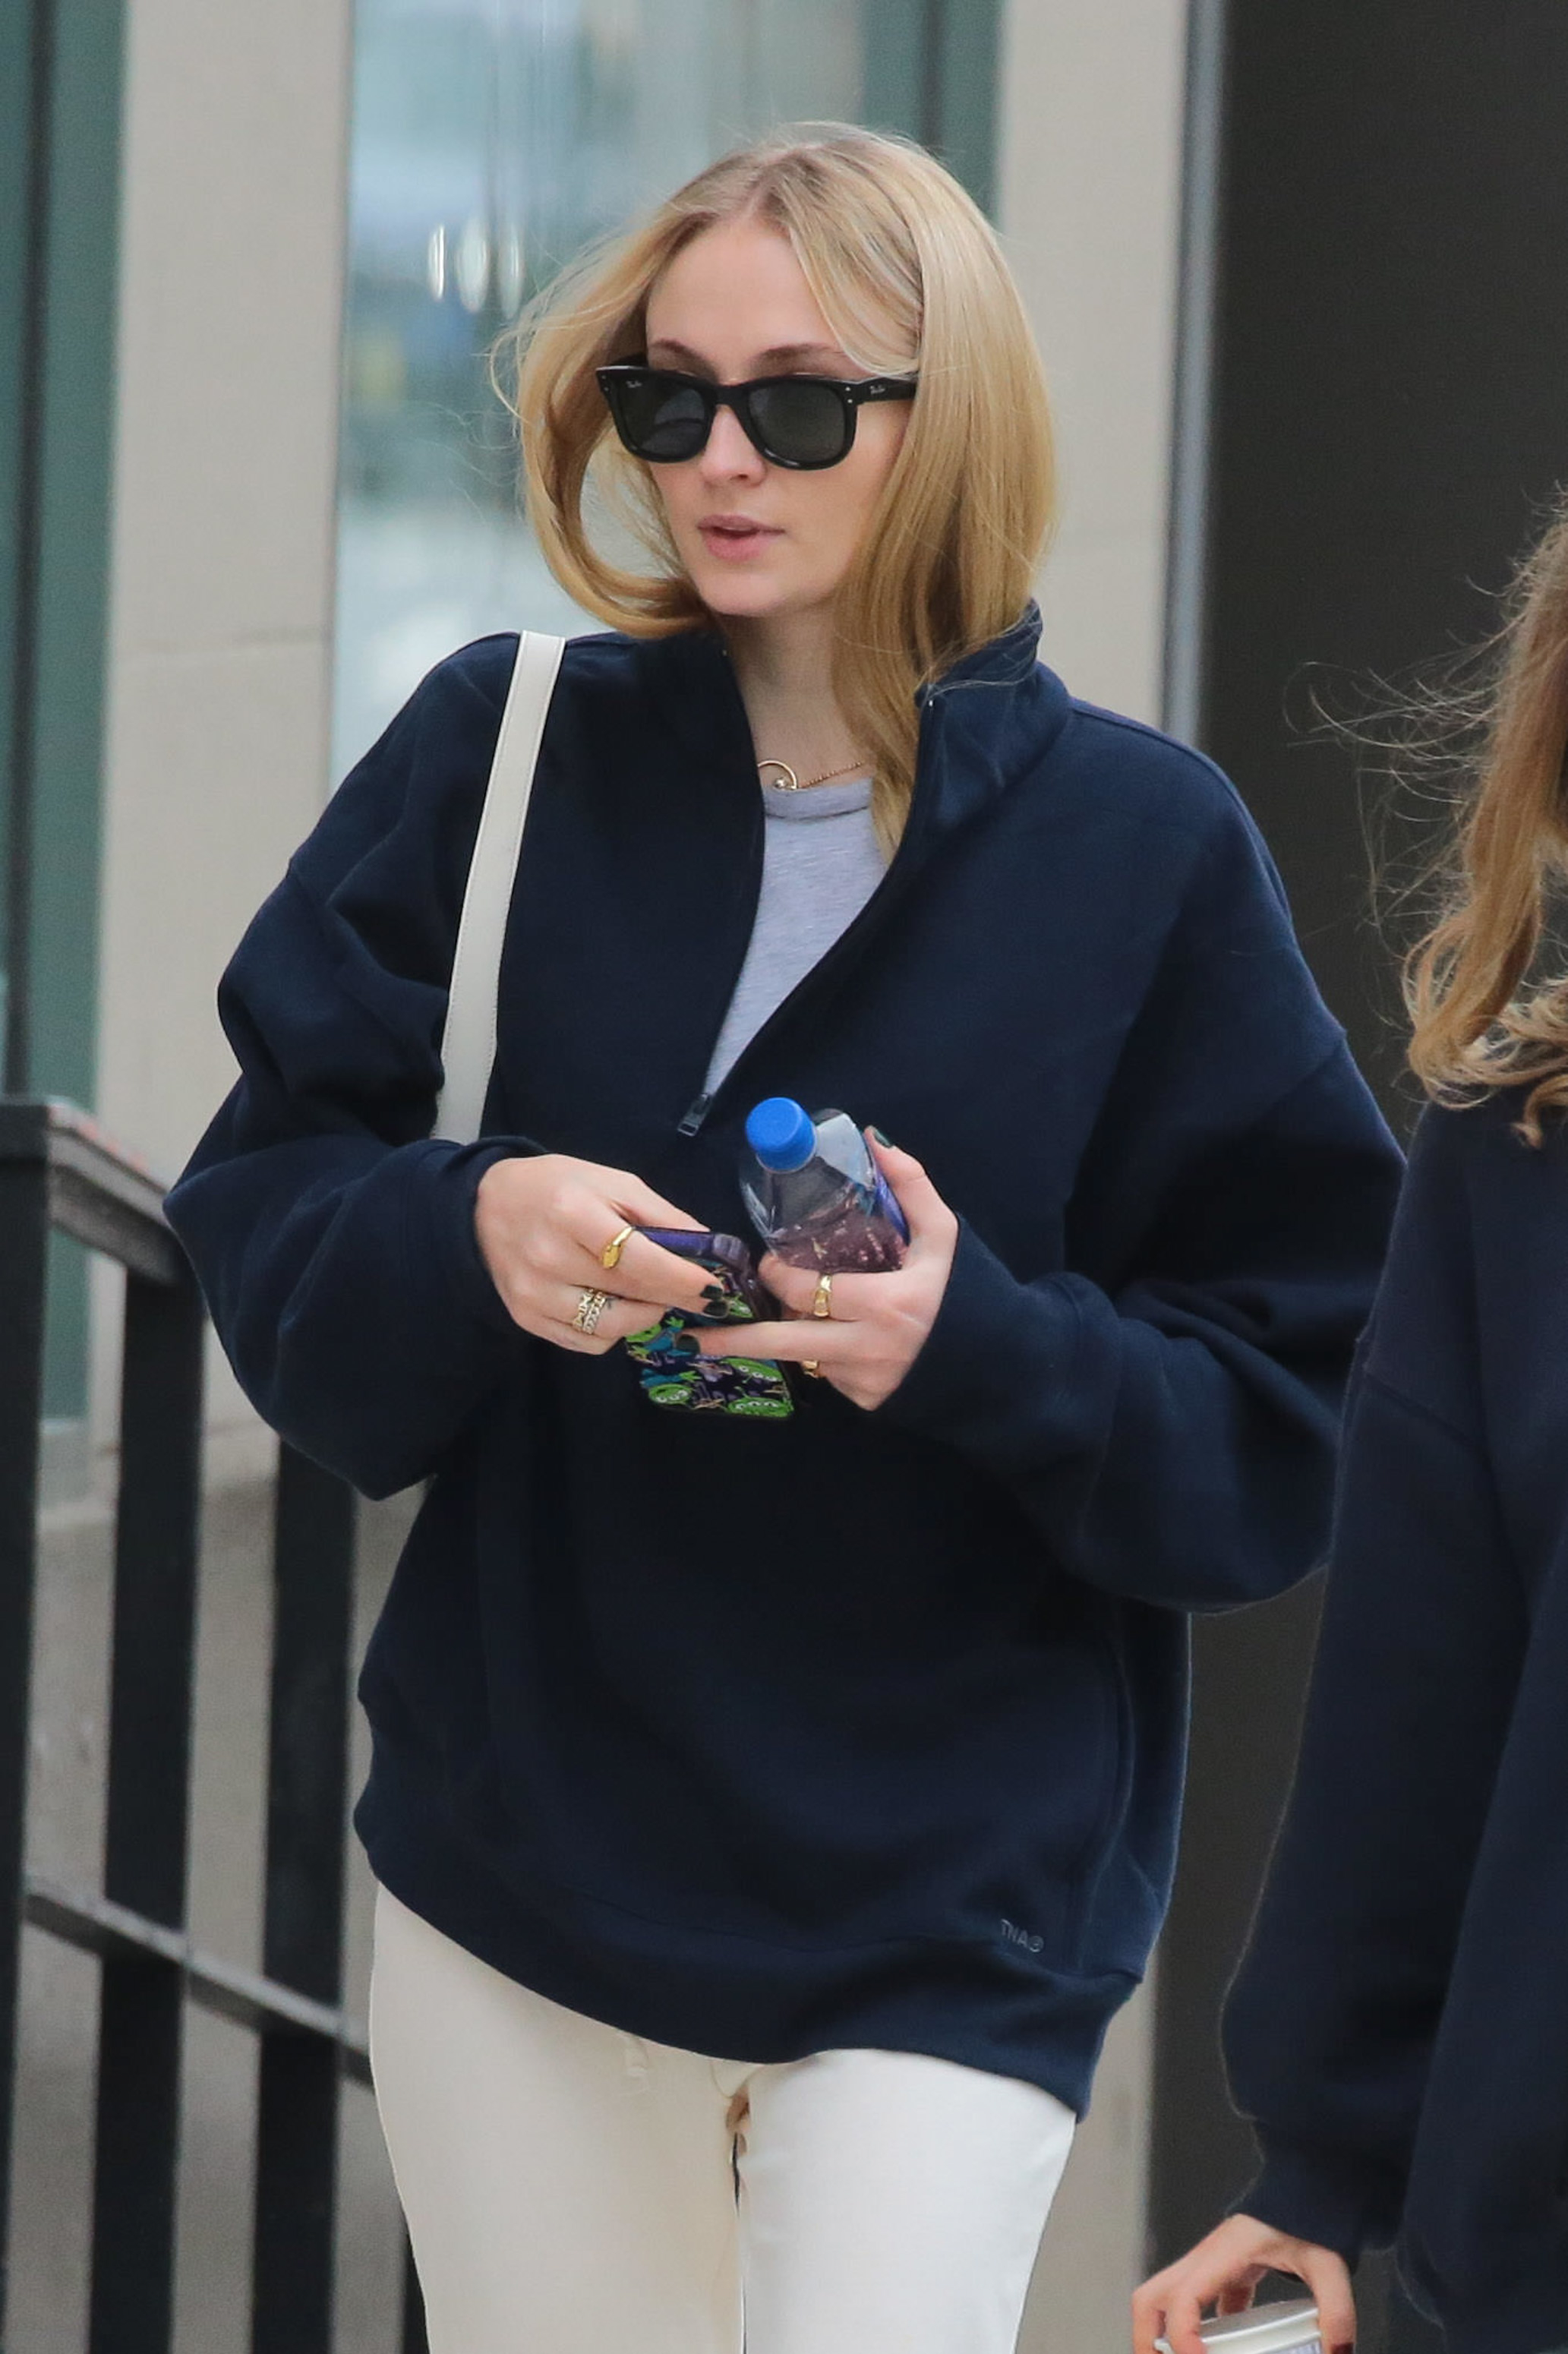 Sophie outside wearing sunglasses and a jacket